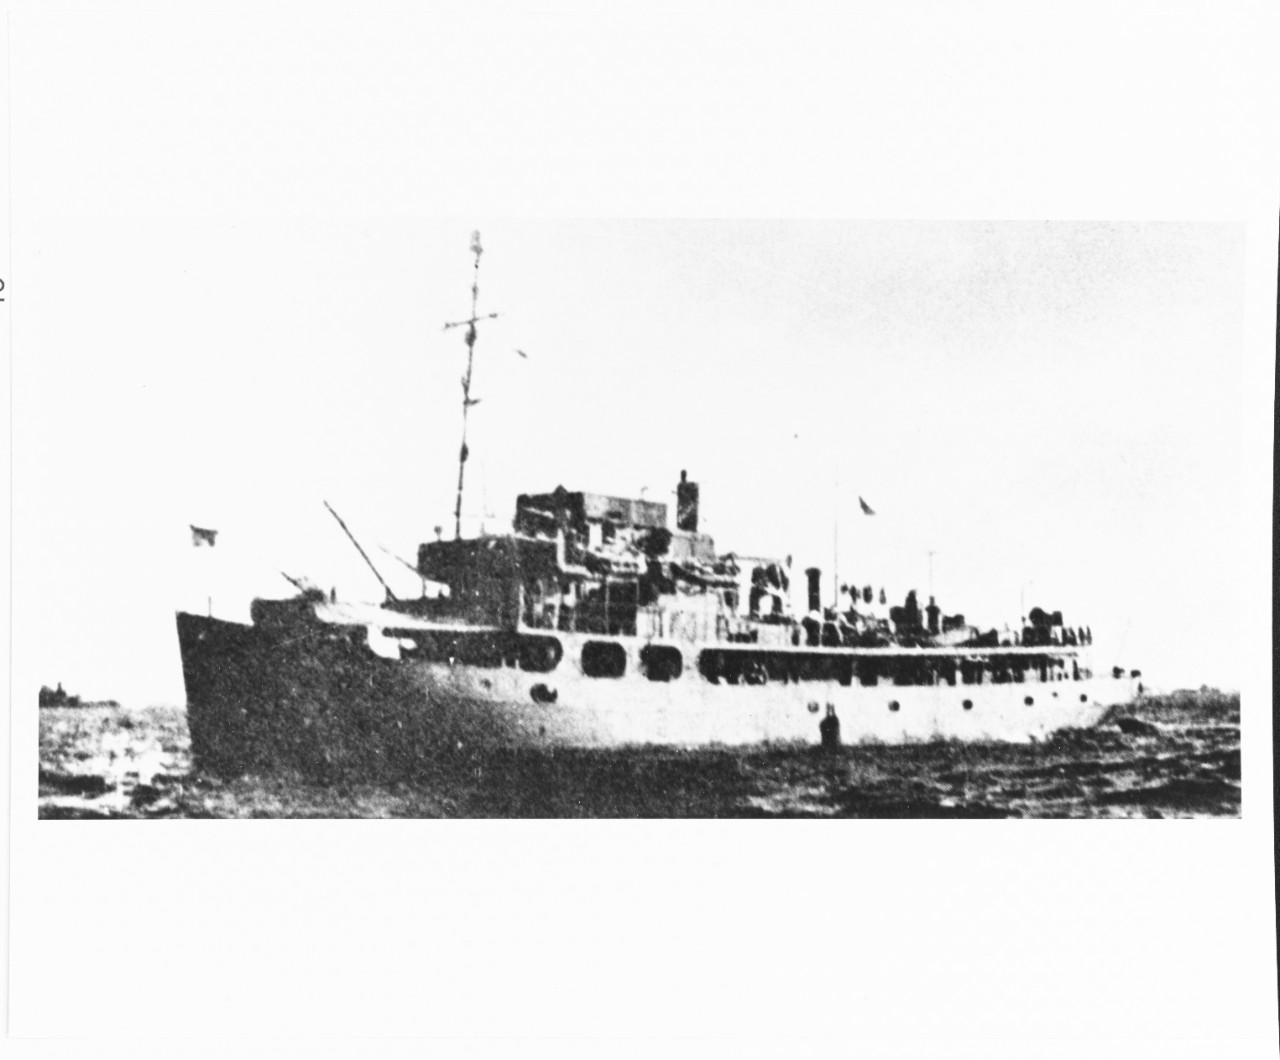 USS HYDROGRAPHER (AGS-2)